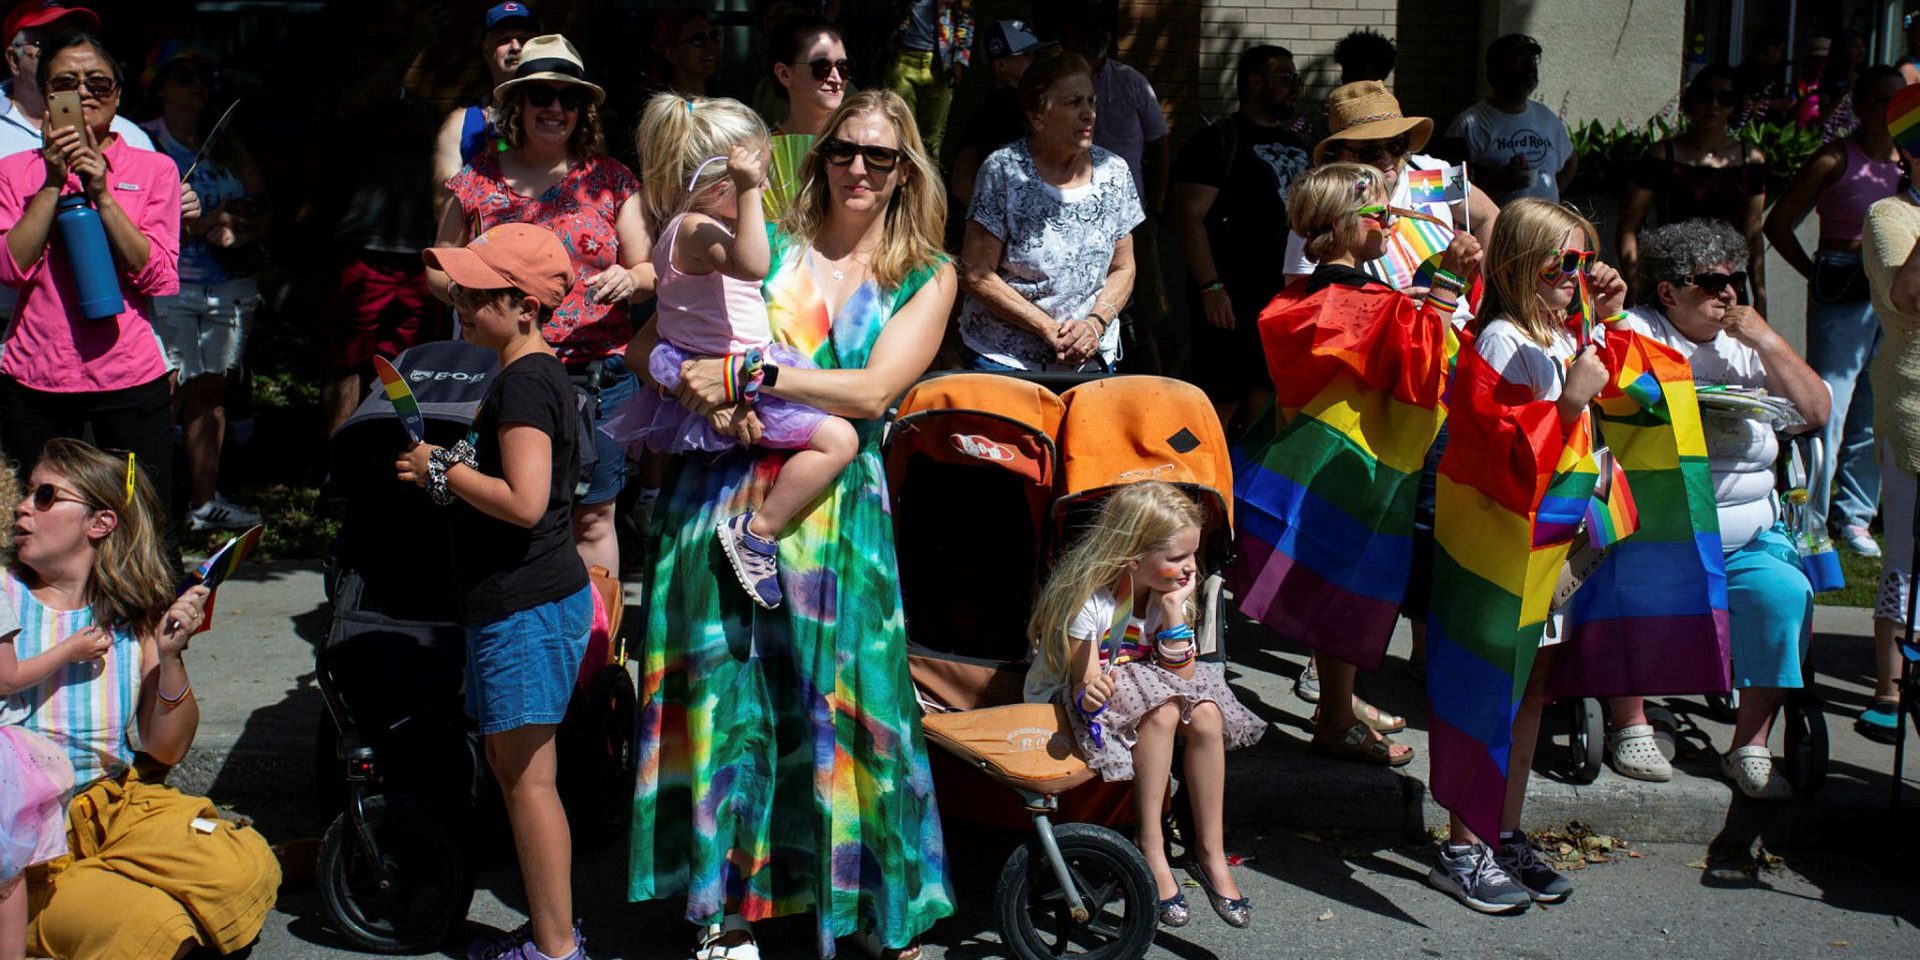 The Ottawa Pride parade passes onlookers along Kent Street on Aug. 28, 2022. Andrew Meade